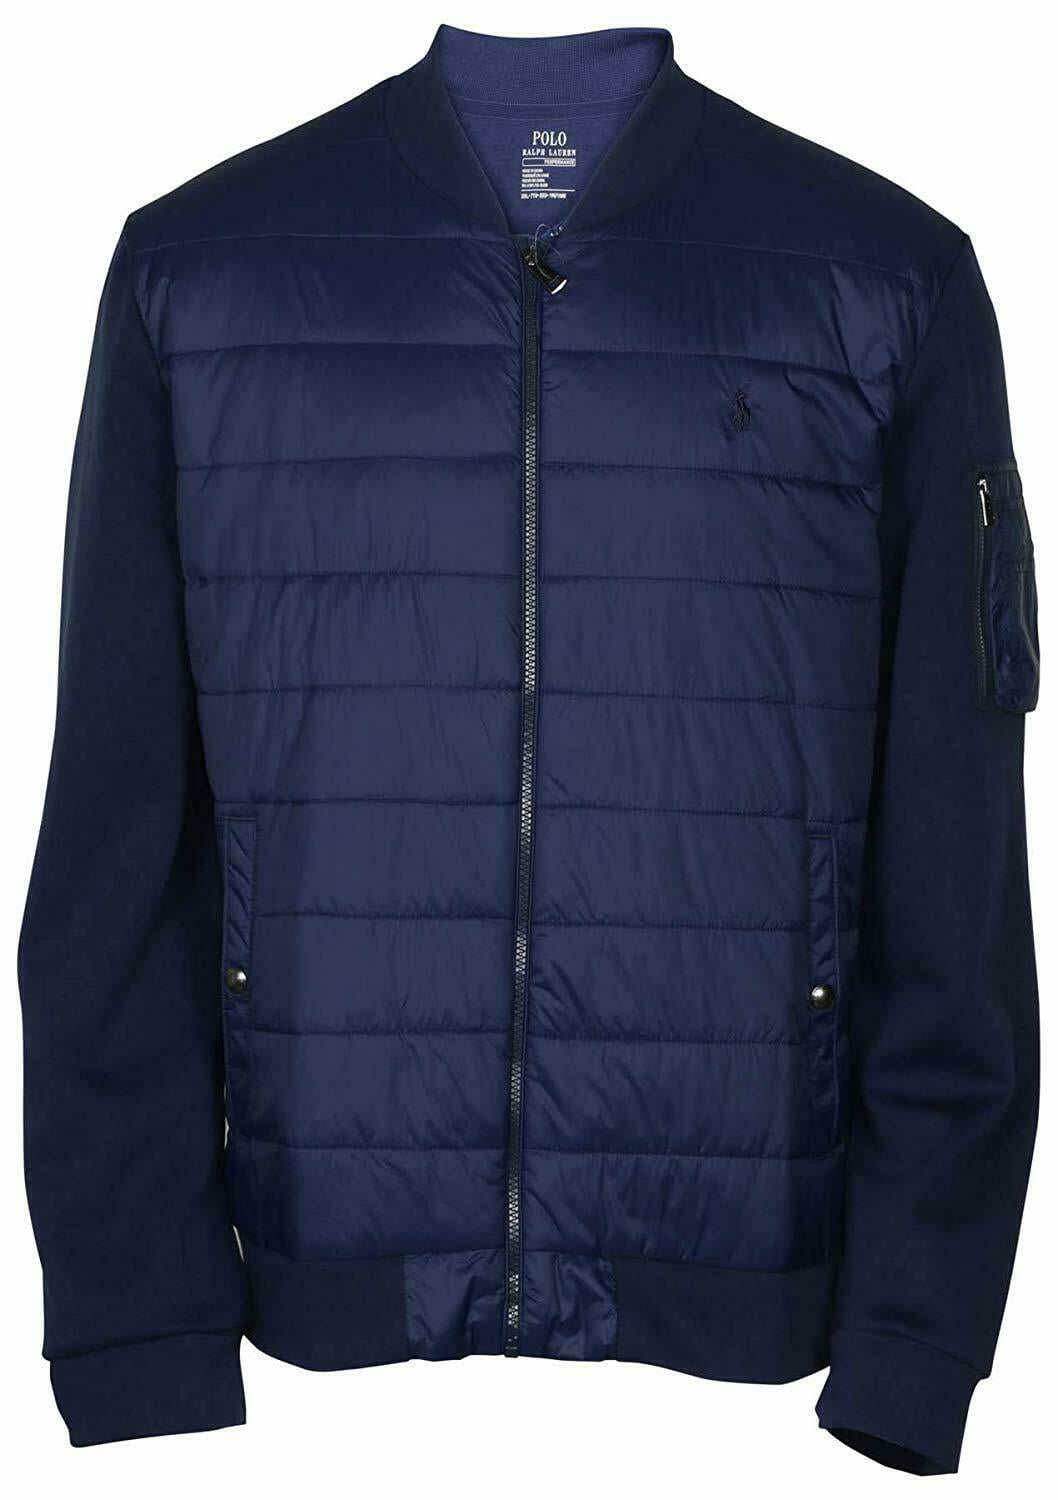 New Polo Ralph Lauren Men's Double Knit Quilted Bomber Jacket Navy S,  7369-2 